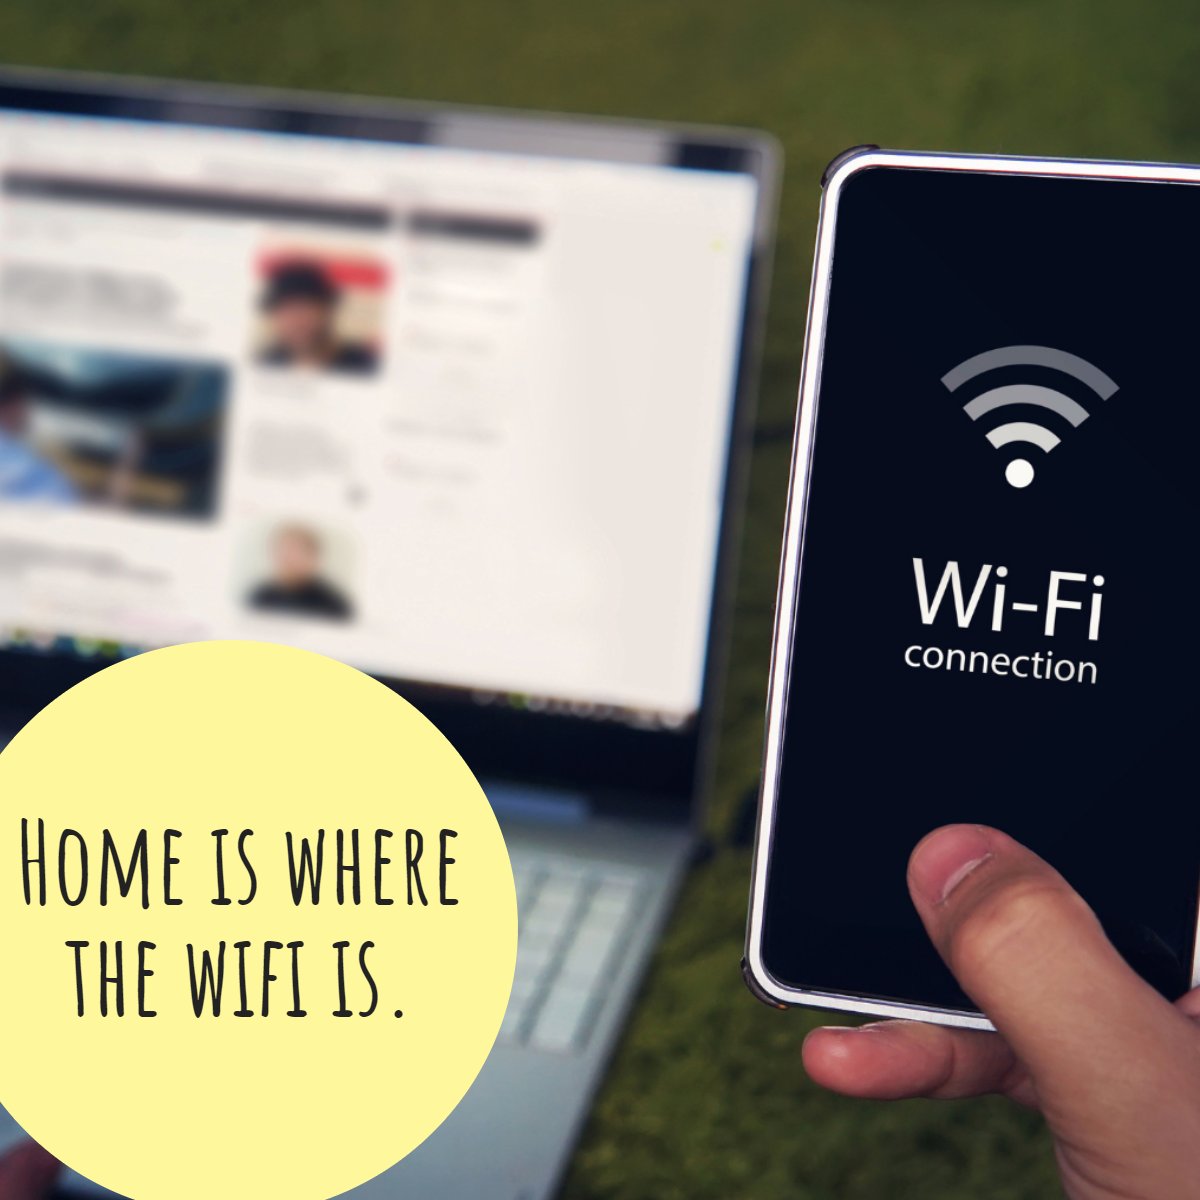 We've said it before and we'll say it again:

'Home is where the wifi is.' 😅

How would you keep yourself busy in a home without wifi? Let us know in the comments! 💭

#wifi #home #house #realestate #realtor #buy #sell #homeowner
 #davidredding #azreddingteam